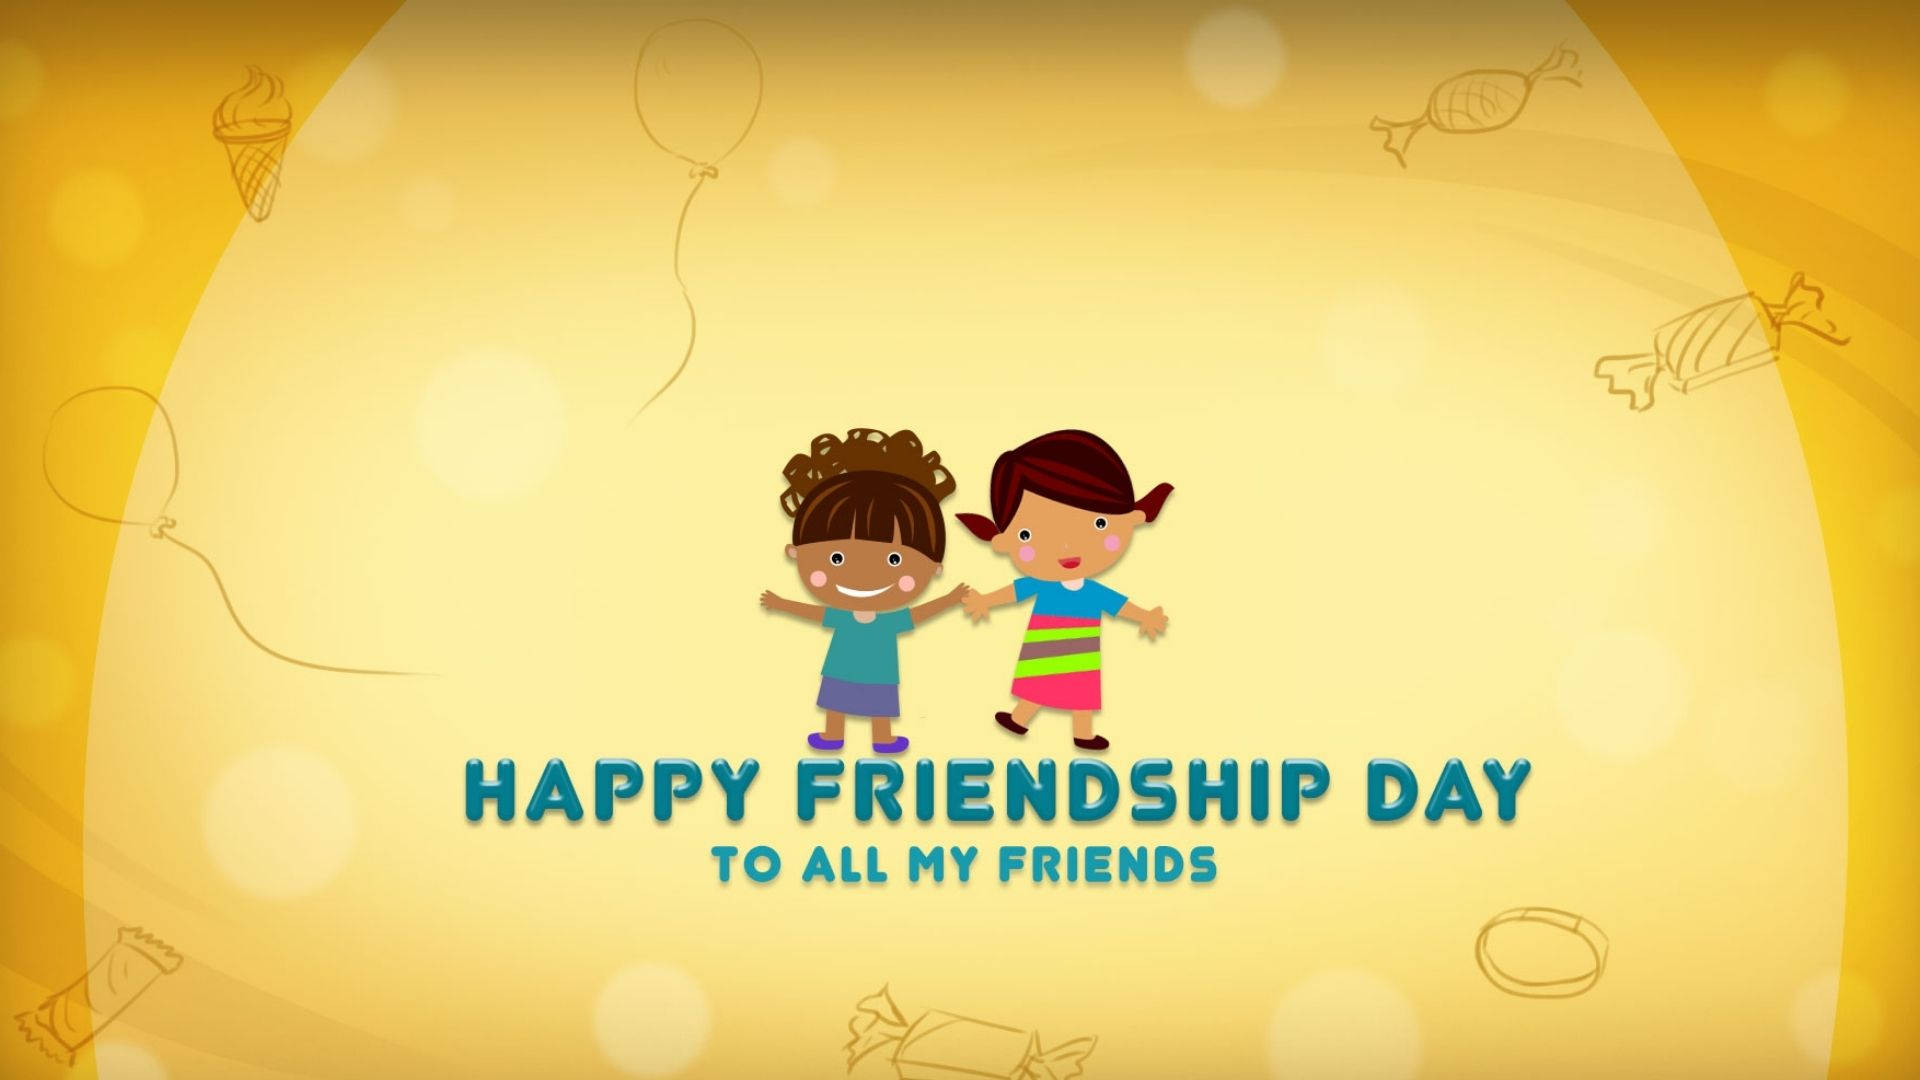 Friends For Friendship Day